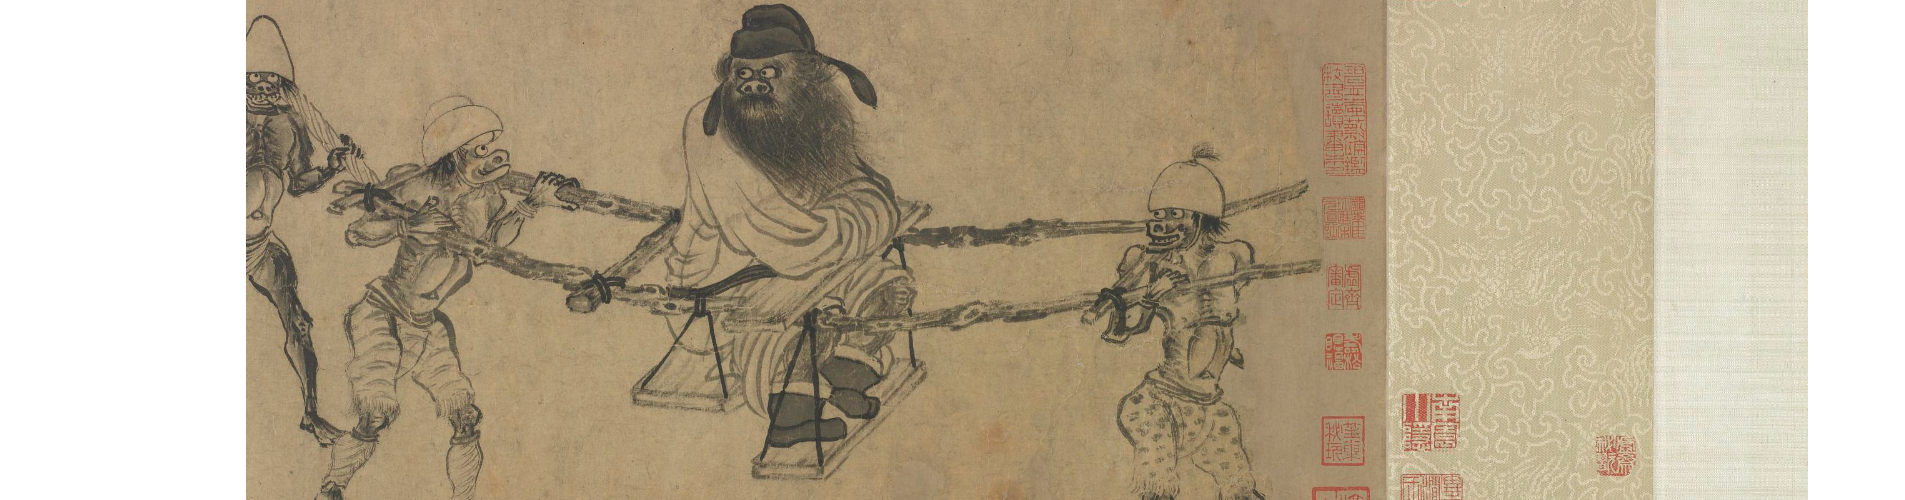 Zhong Kui and the Chinese New Year – Smithsonian Libraries / Unbound